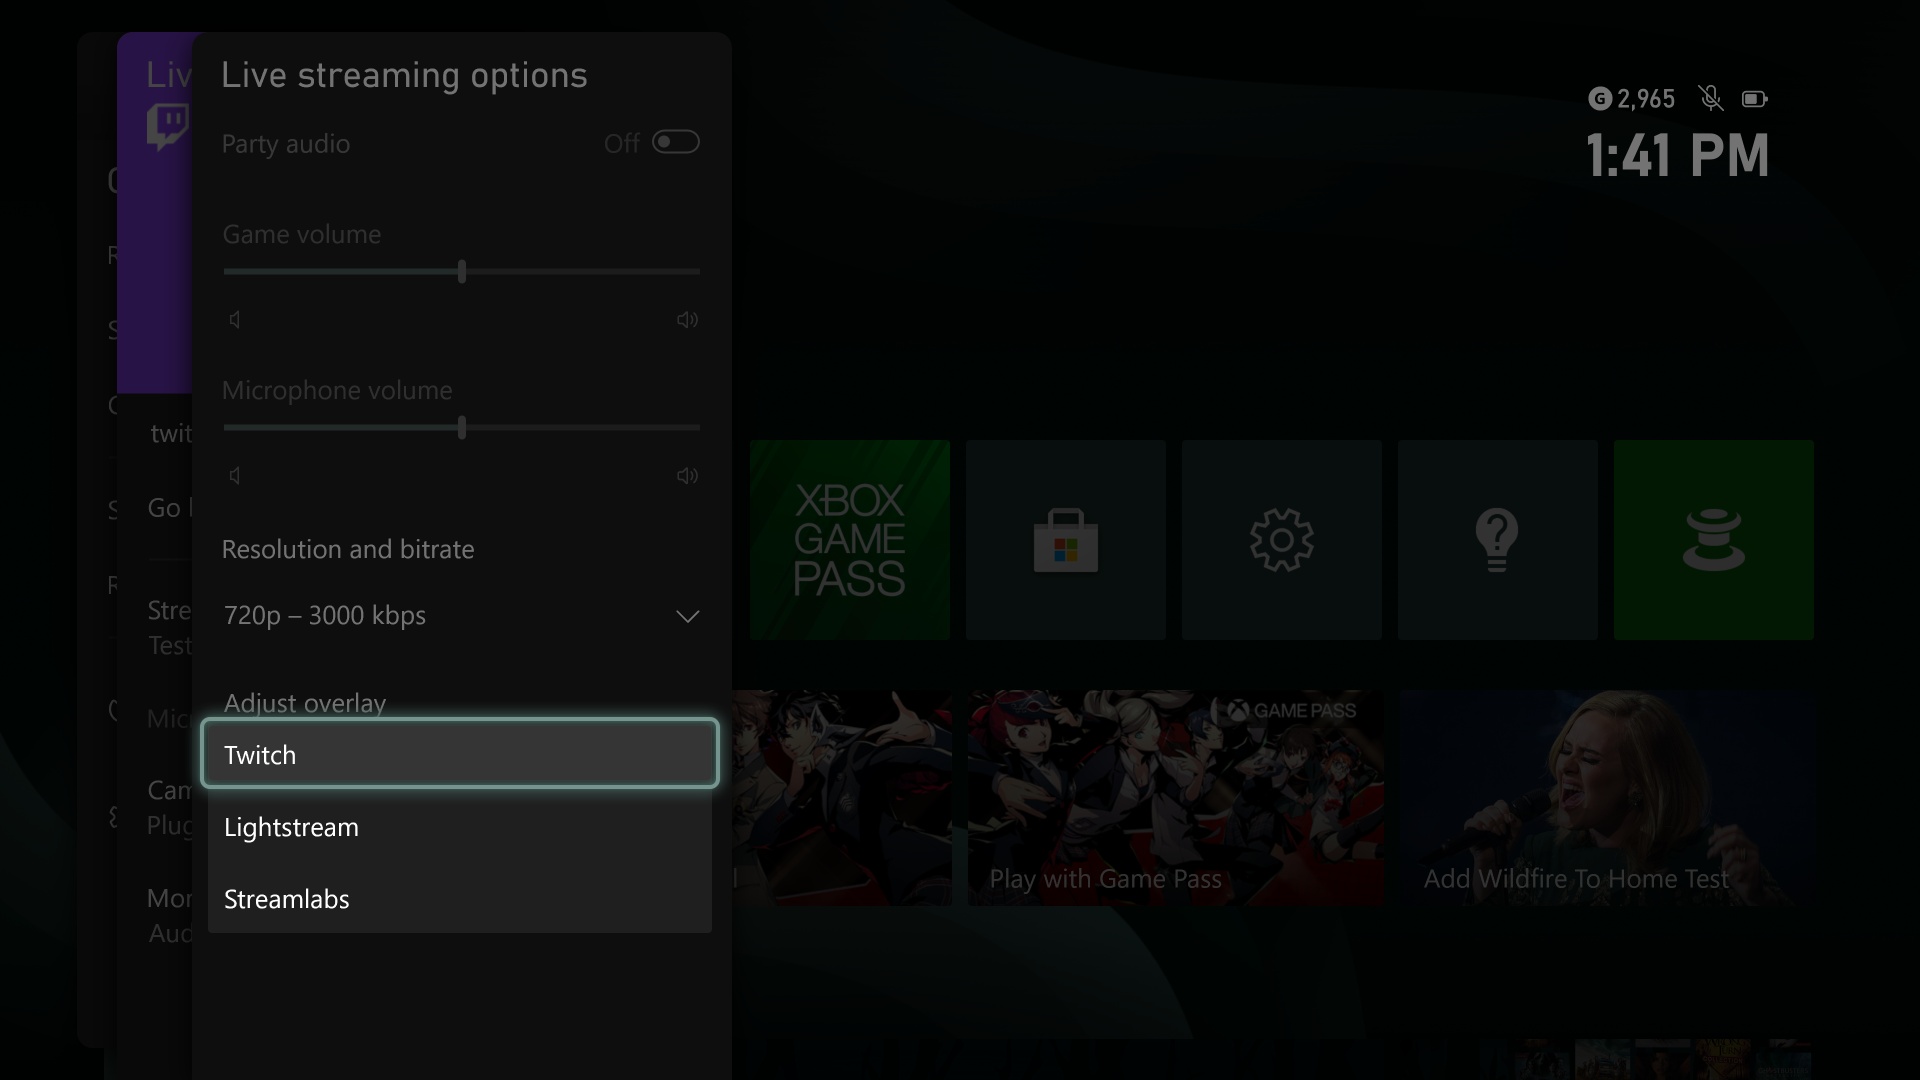 Controller vibration support comes to Microsoft Edge for Xbox Cloud Gaming  : r/xbox